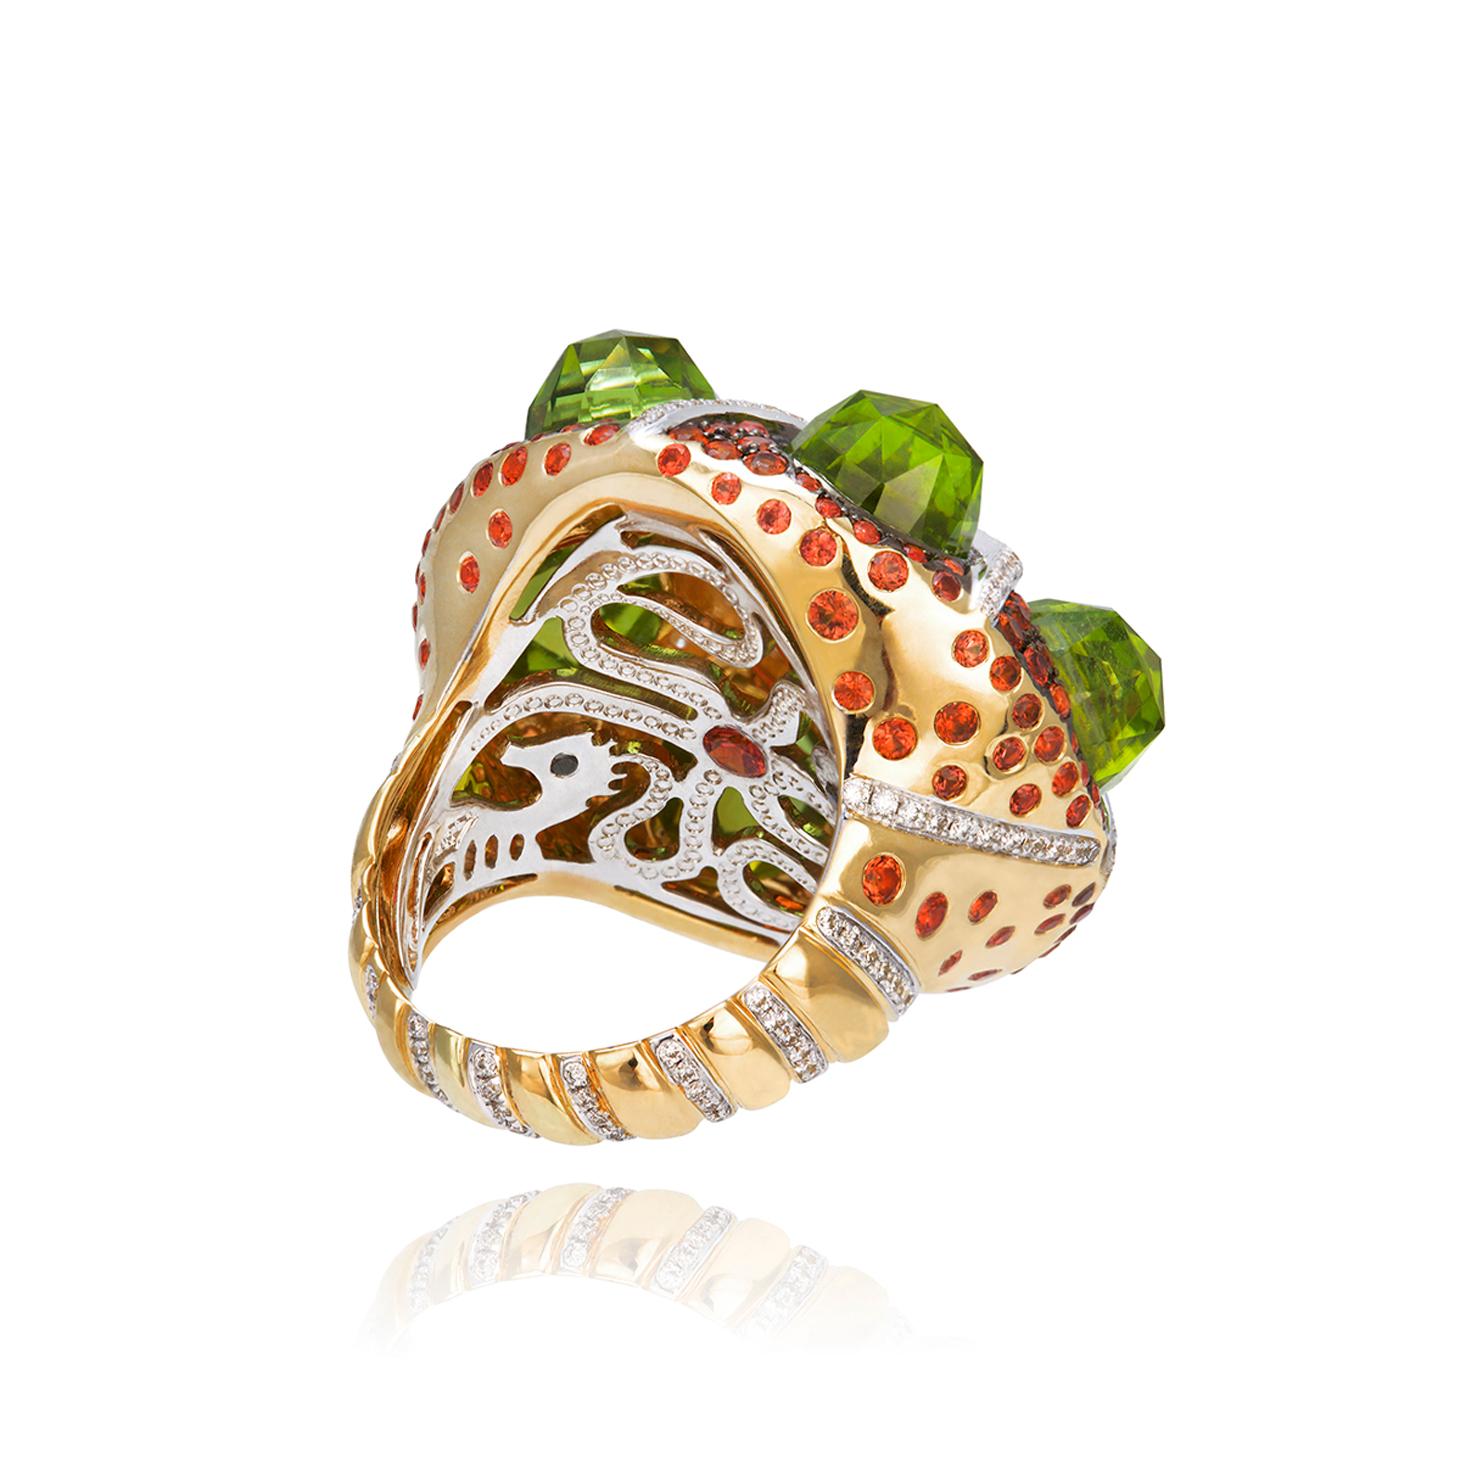 White and Black Diamonds 0.95 cts, Orange Sapphires 2.43 cts - Citrine Madeira round checkerboard cut 5.07 cts - Peridots briolette bullett 6 pcs 19.68 cts     
         
Ophiura Ring from Thalassa Collection, features a starfish moving between